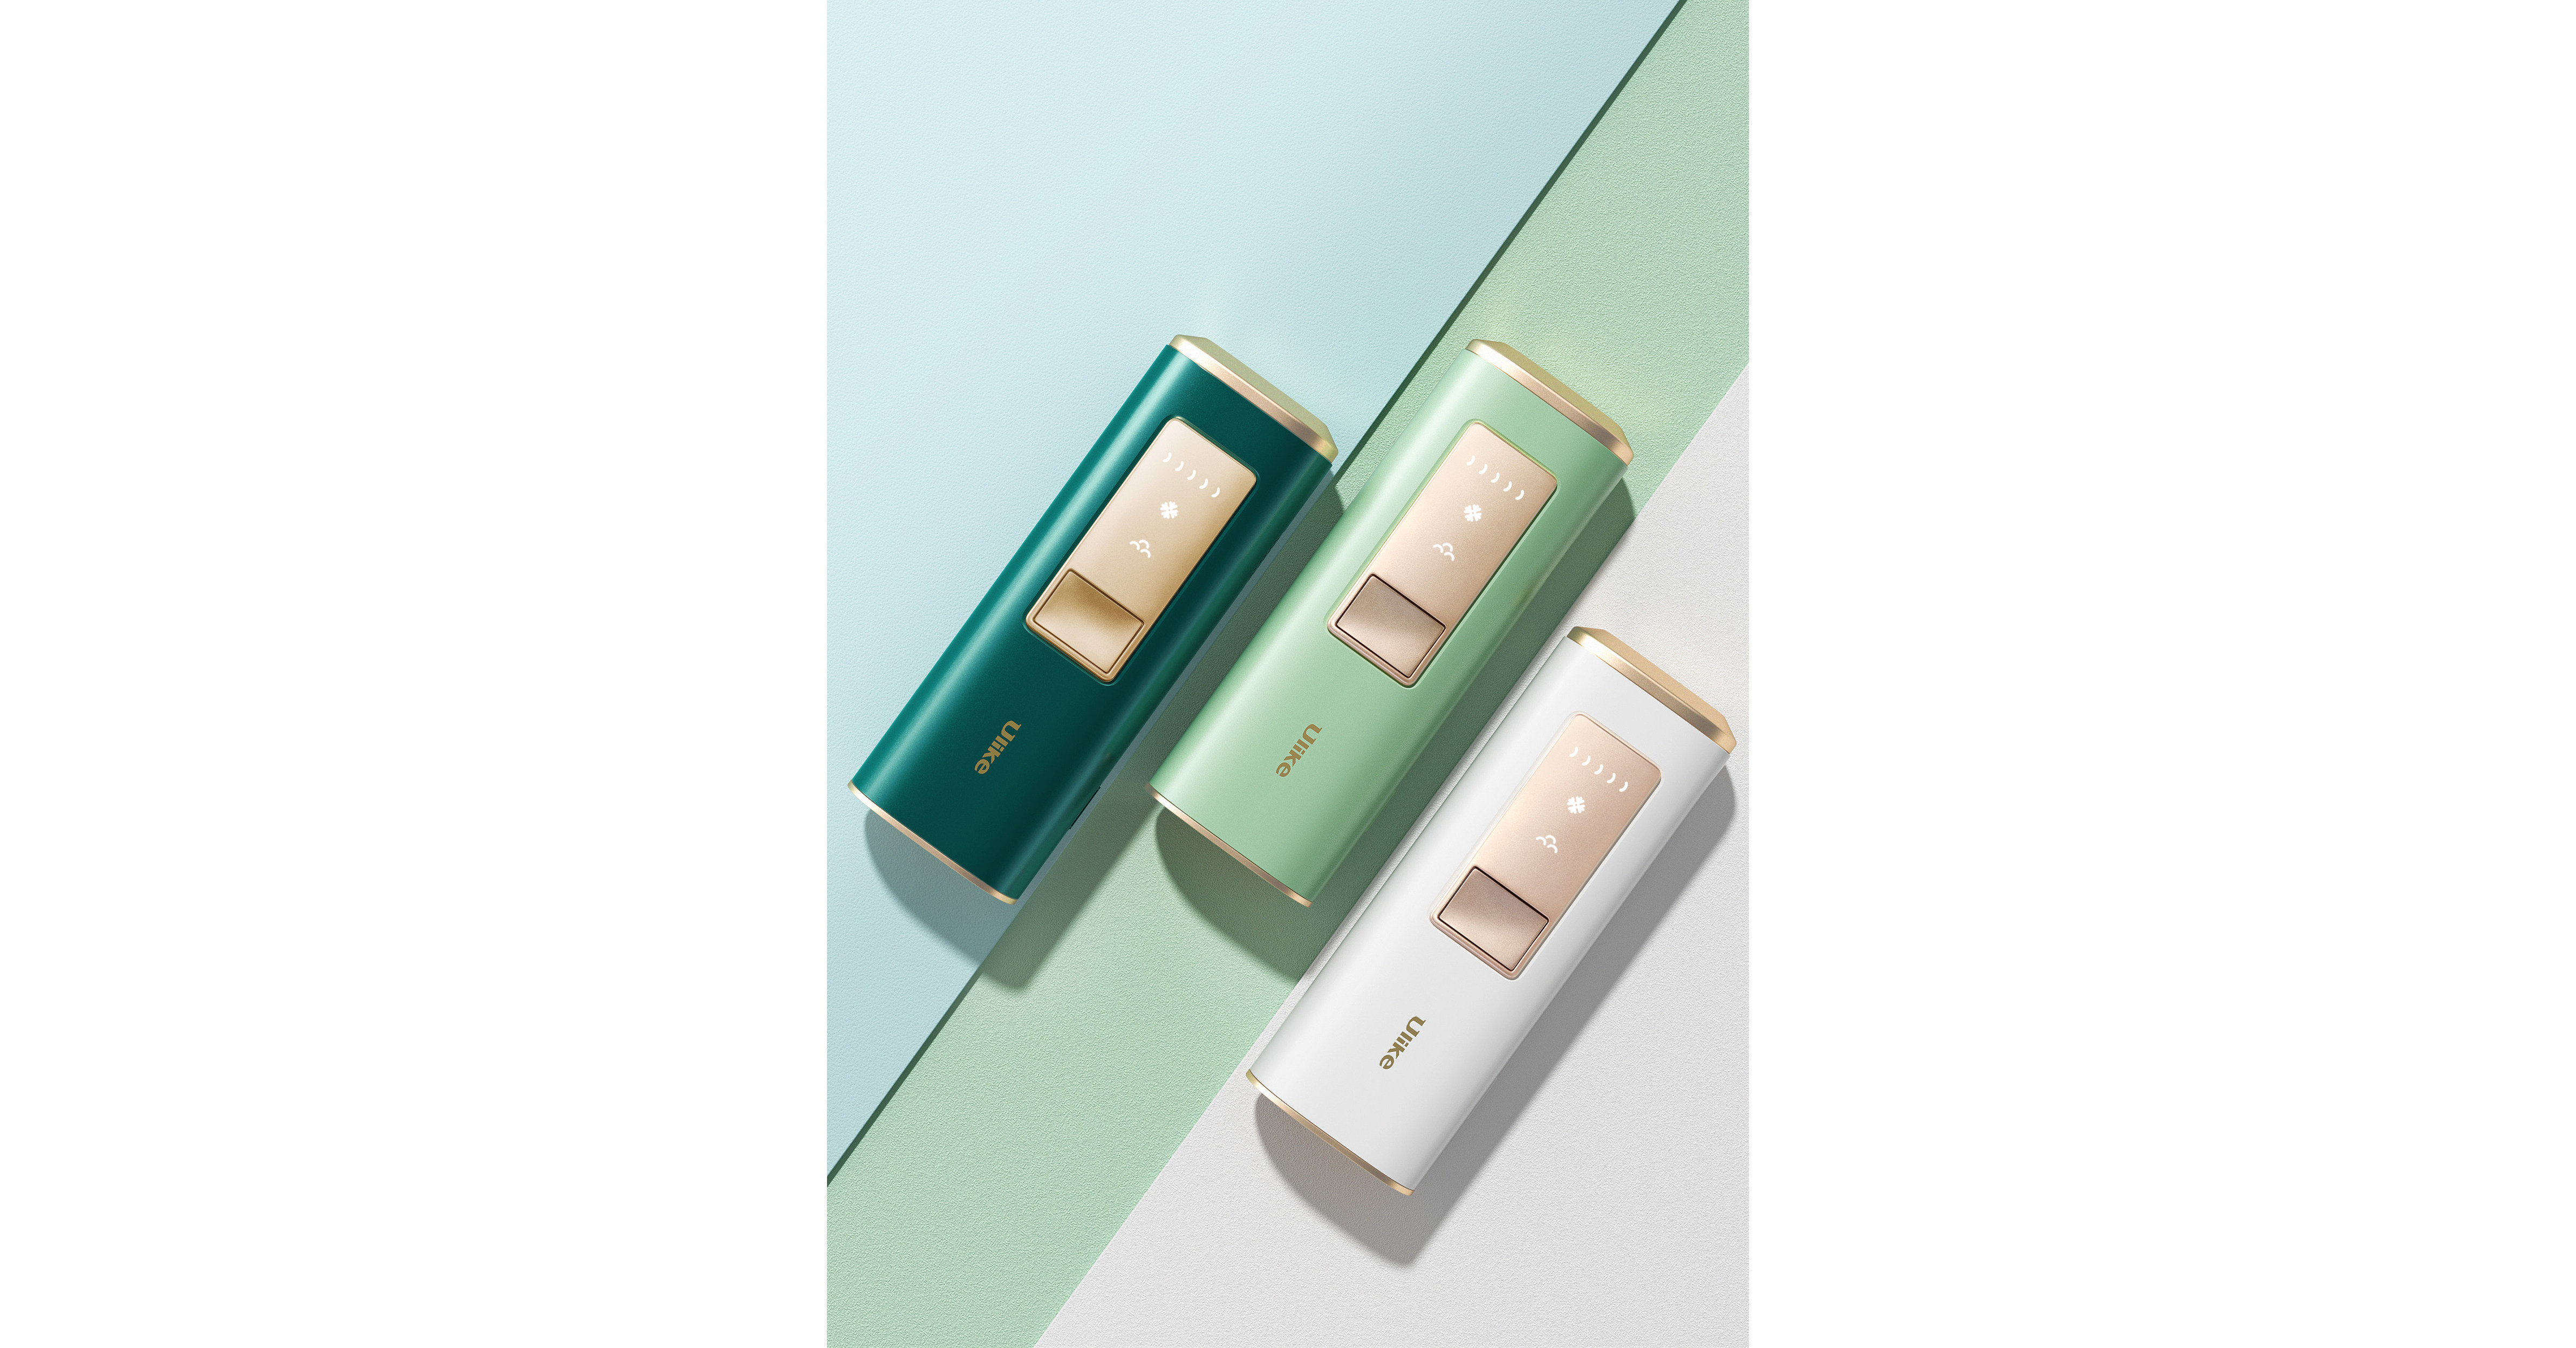 Ulike Beauty Launches Sapphire Air Series At-Home Ice-cooling IPL Hair Removal Devices in the US